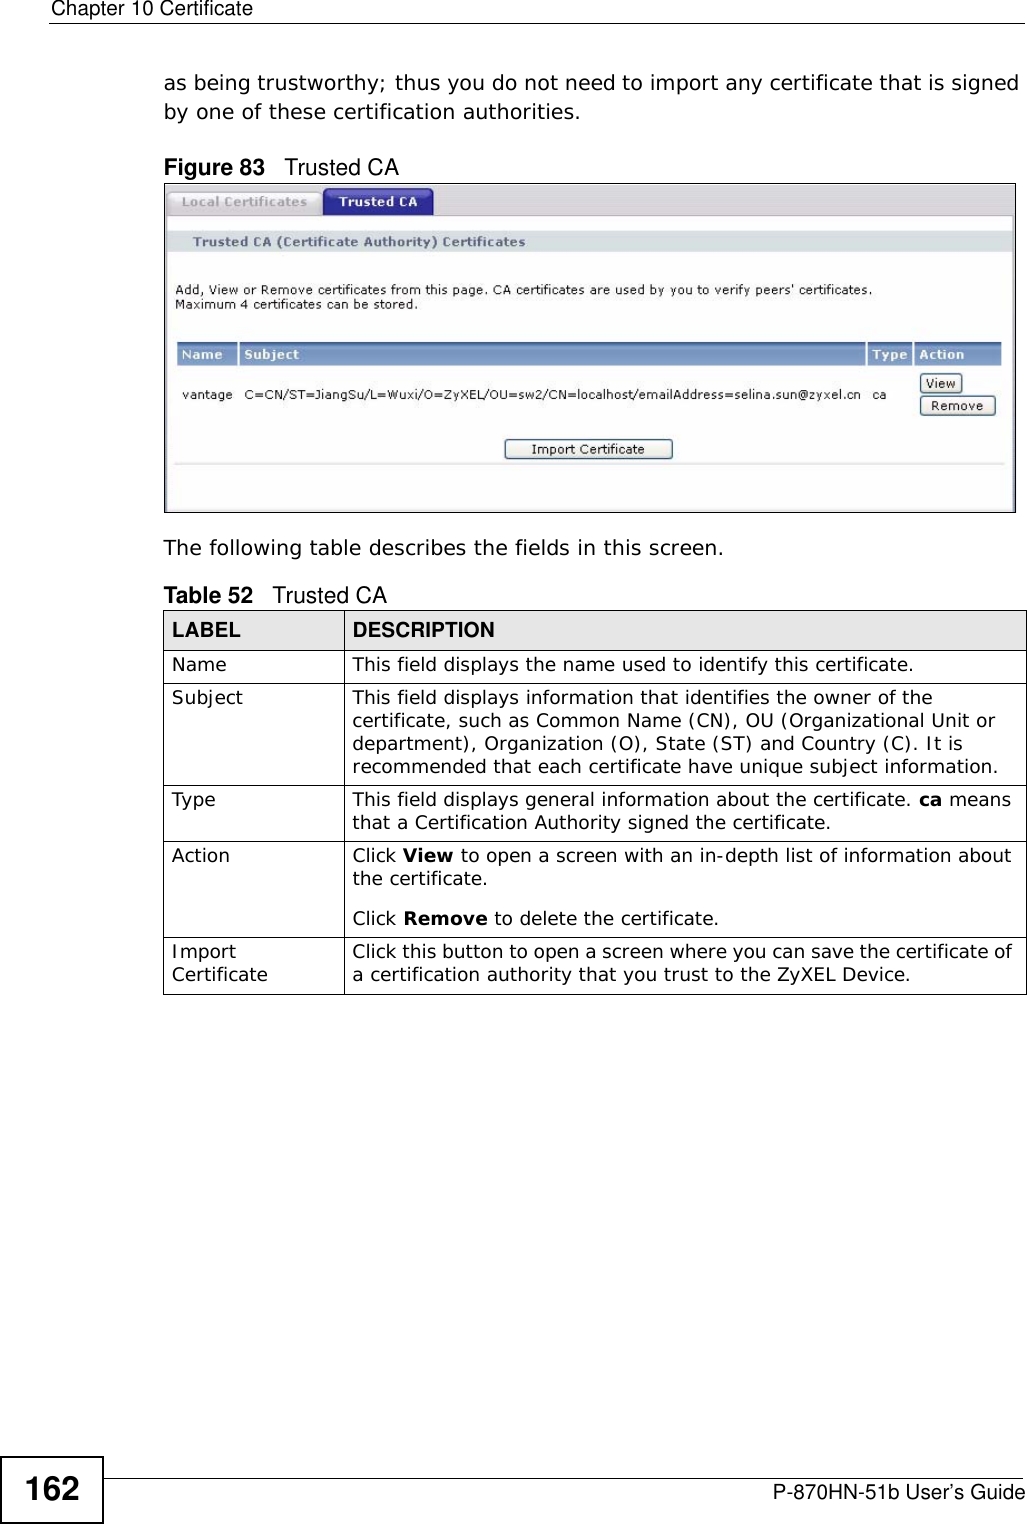 Chapter 10 CertificateP-870HN-51b User’s Guide162as being trustworthy; thus you do not need to import any certificate that is signed by one of these certification authorities. Figure 83   Trusted CA The following table describes the fields in this screen. Table 52   Trusted CALABEL DESCRIPTIONName This field displays the name used to identify this certificate. Subject This field displays information that identifies the owner of the certificate, such as Common Name (CN), OU (Organizational Unit or department), Organization (O), State (ST) and Country (C). It is recommended that each certificate have unique subject information.Type This field displays general information about the certificate. ca means that a Certification Authority signed the certificate. Action Click View to open a screen with an in-depth list of information about the certificate.Click Remove to delete the certificate.Import Certificate Click this button to open a screen where you can save the certificate of a certification authority that you trust to the ZyXEL Device.